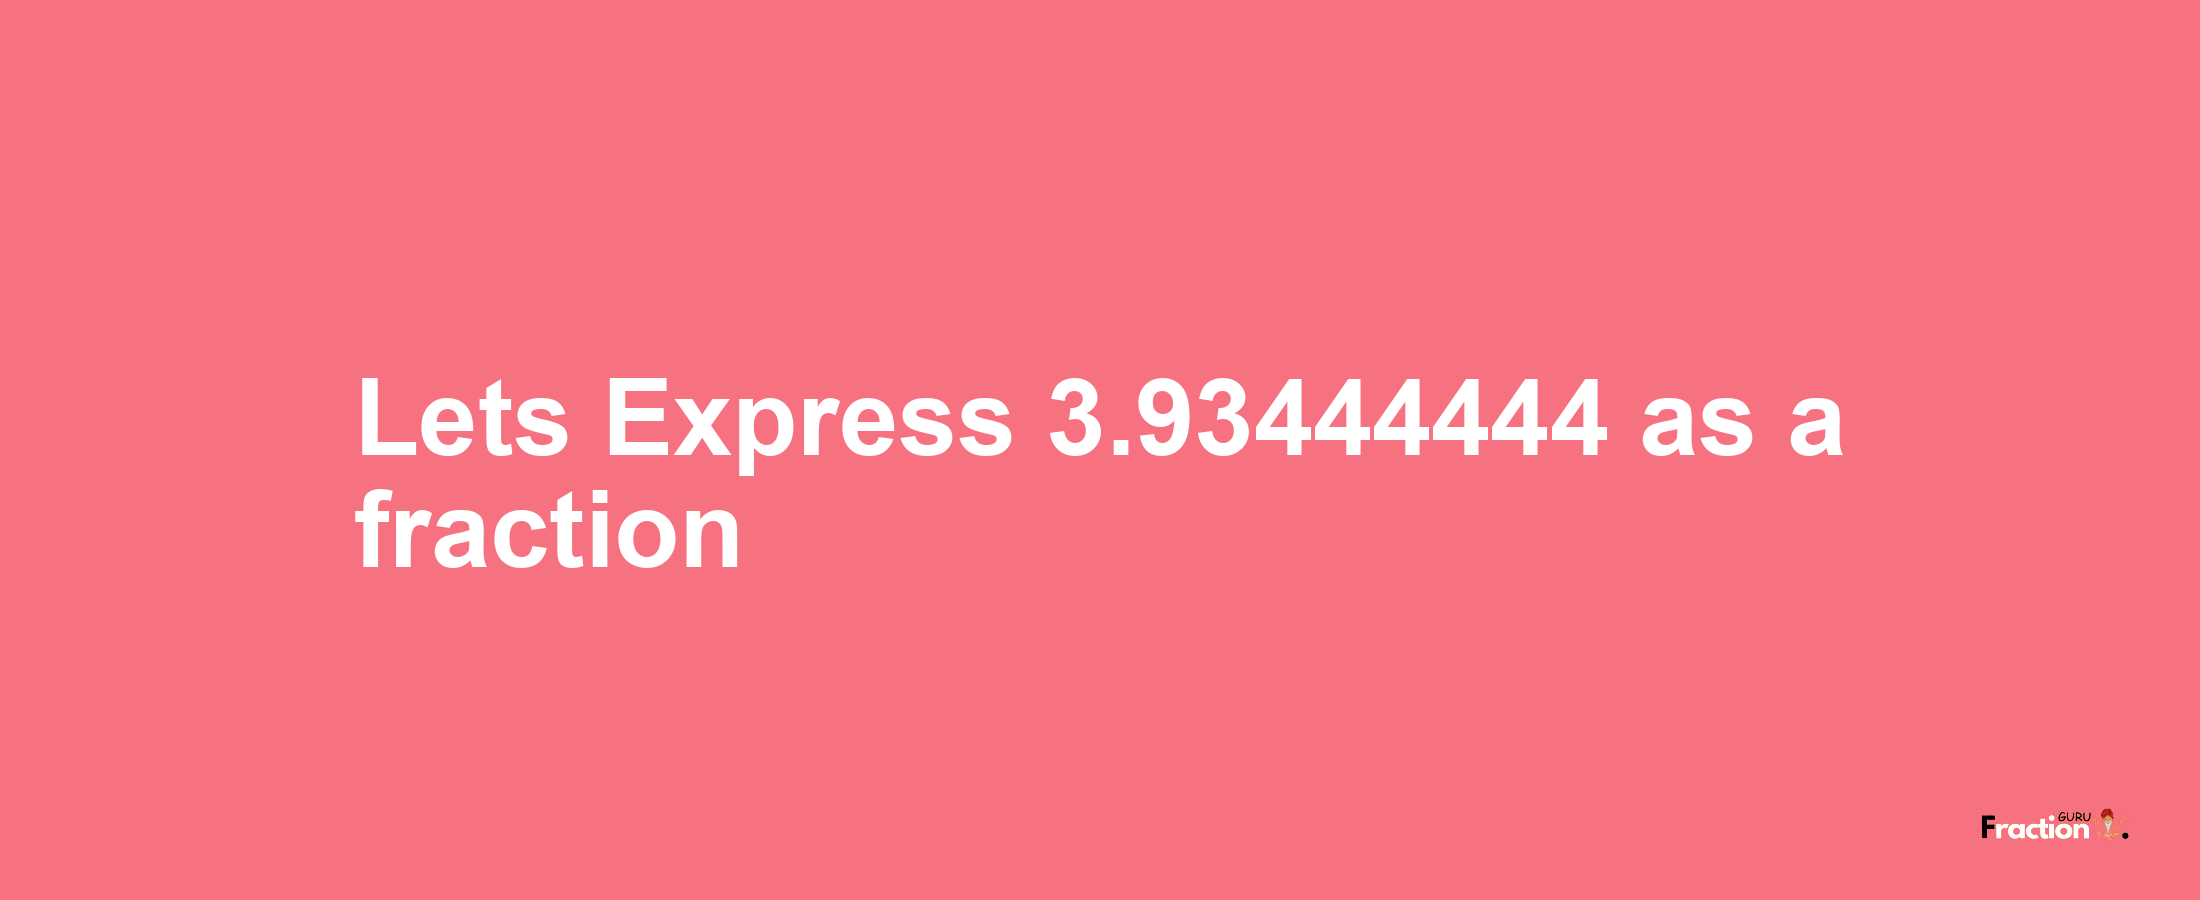 Lets Express 3.93444444 as afraction